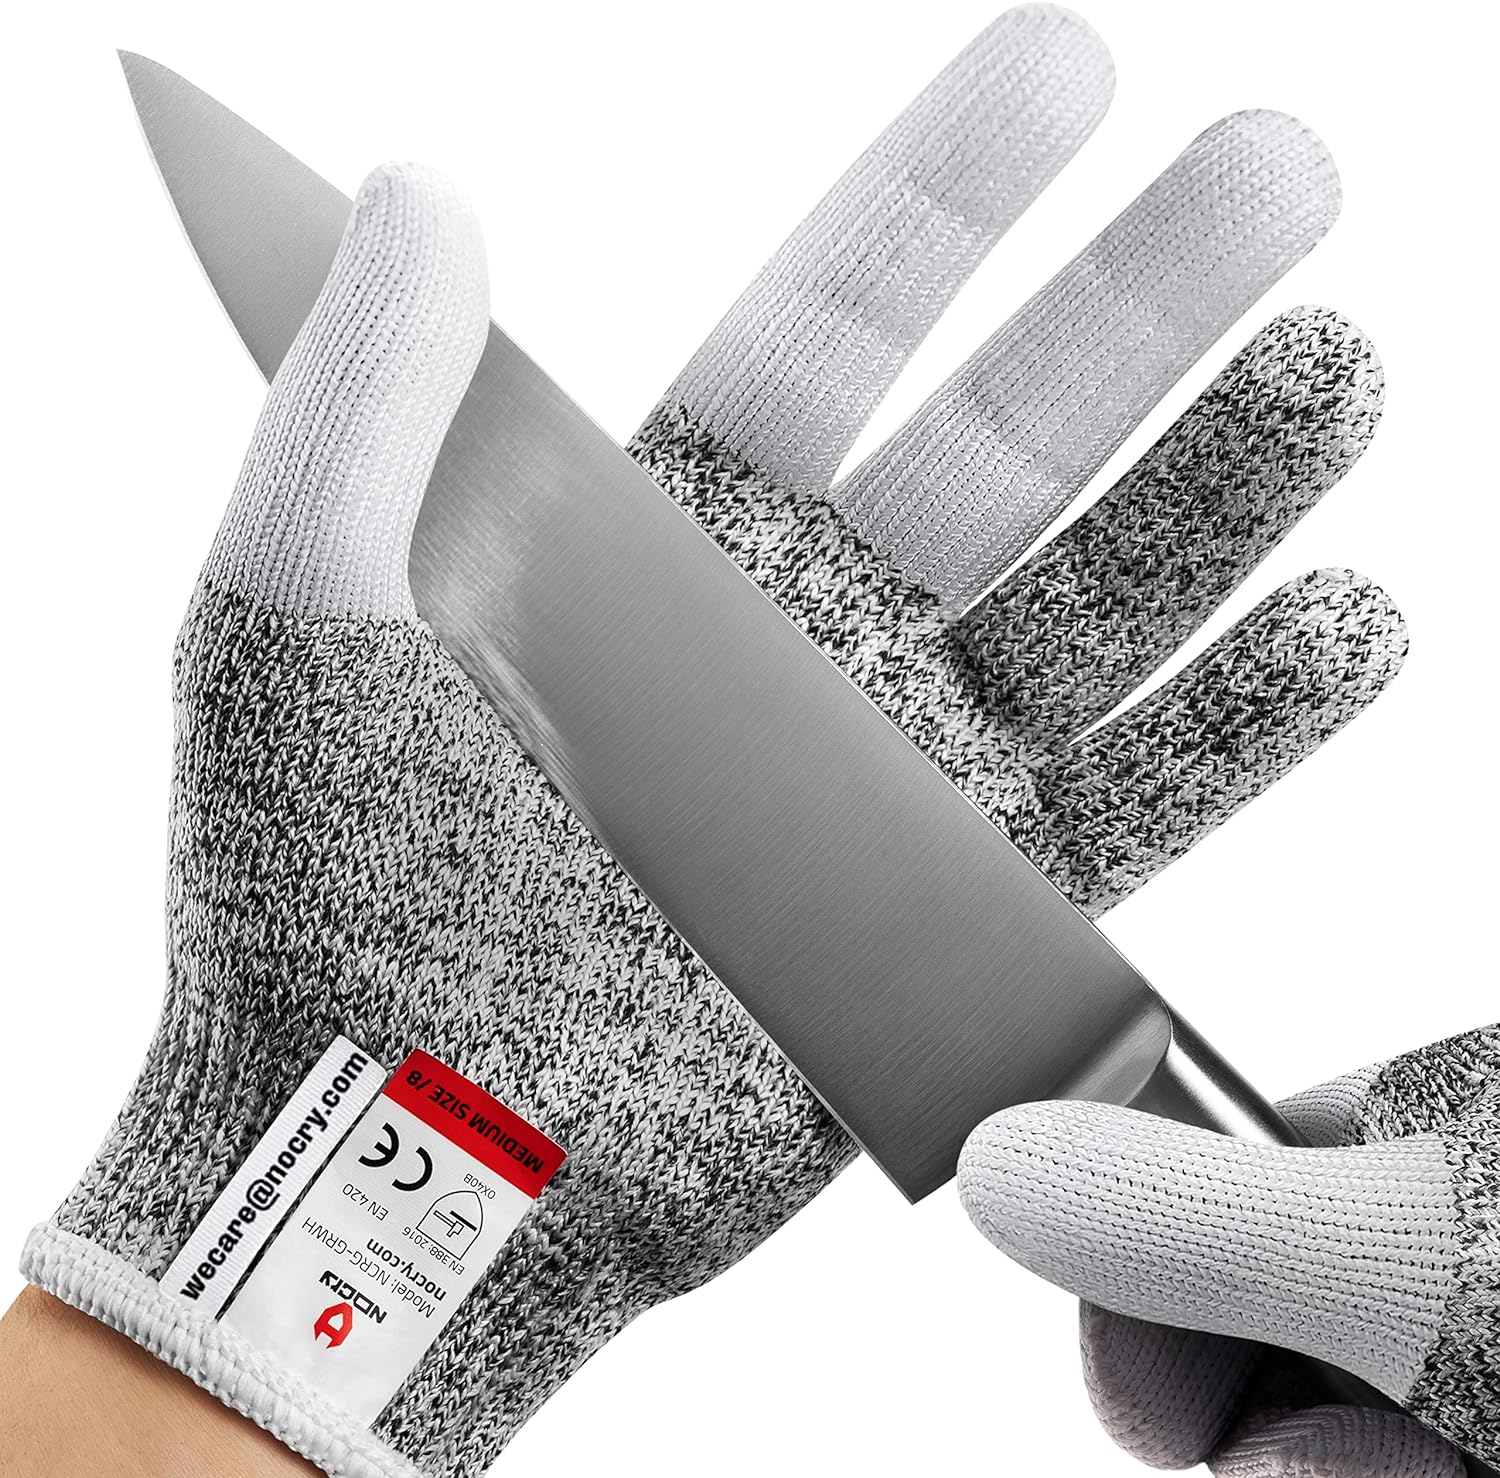 NoCry Cut Resistant Work Gloves for Women and Men